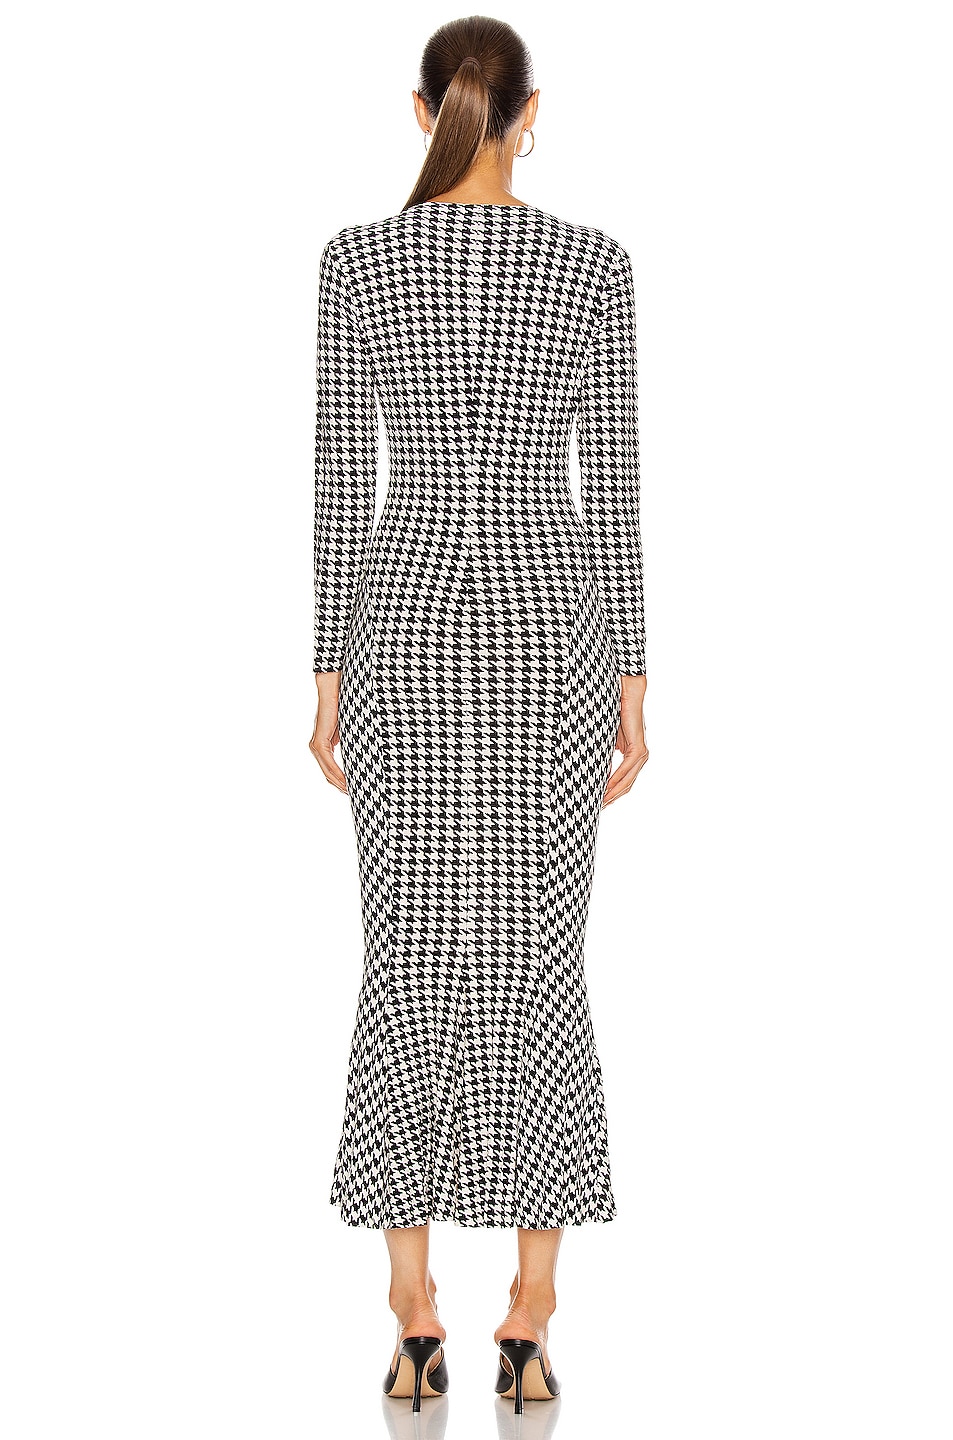 Norma Kamali Long Sleeve Crew Fishtail Dress in Large Check | FWRD